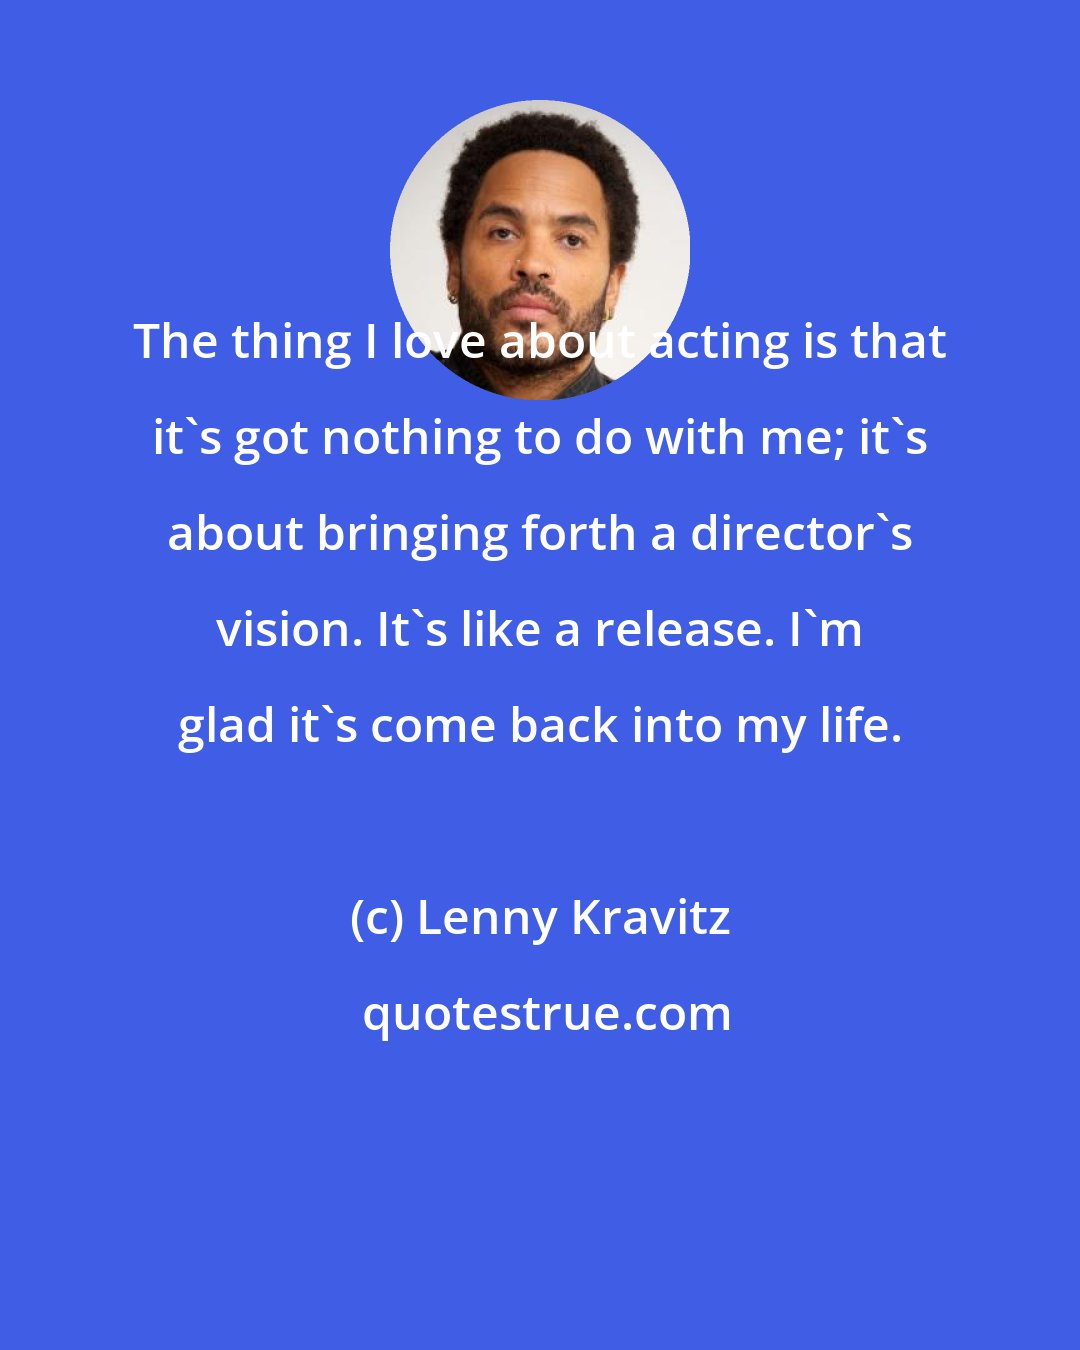 Lenny Kravitz: The thing I love about acting is that it's got nothing to do with me; it's about bringing forth a director's vision. It's like a release. I'm glad it's come back into my life.